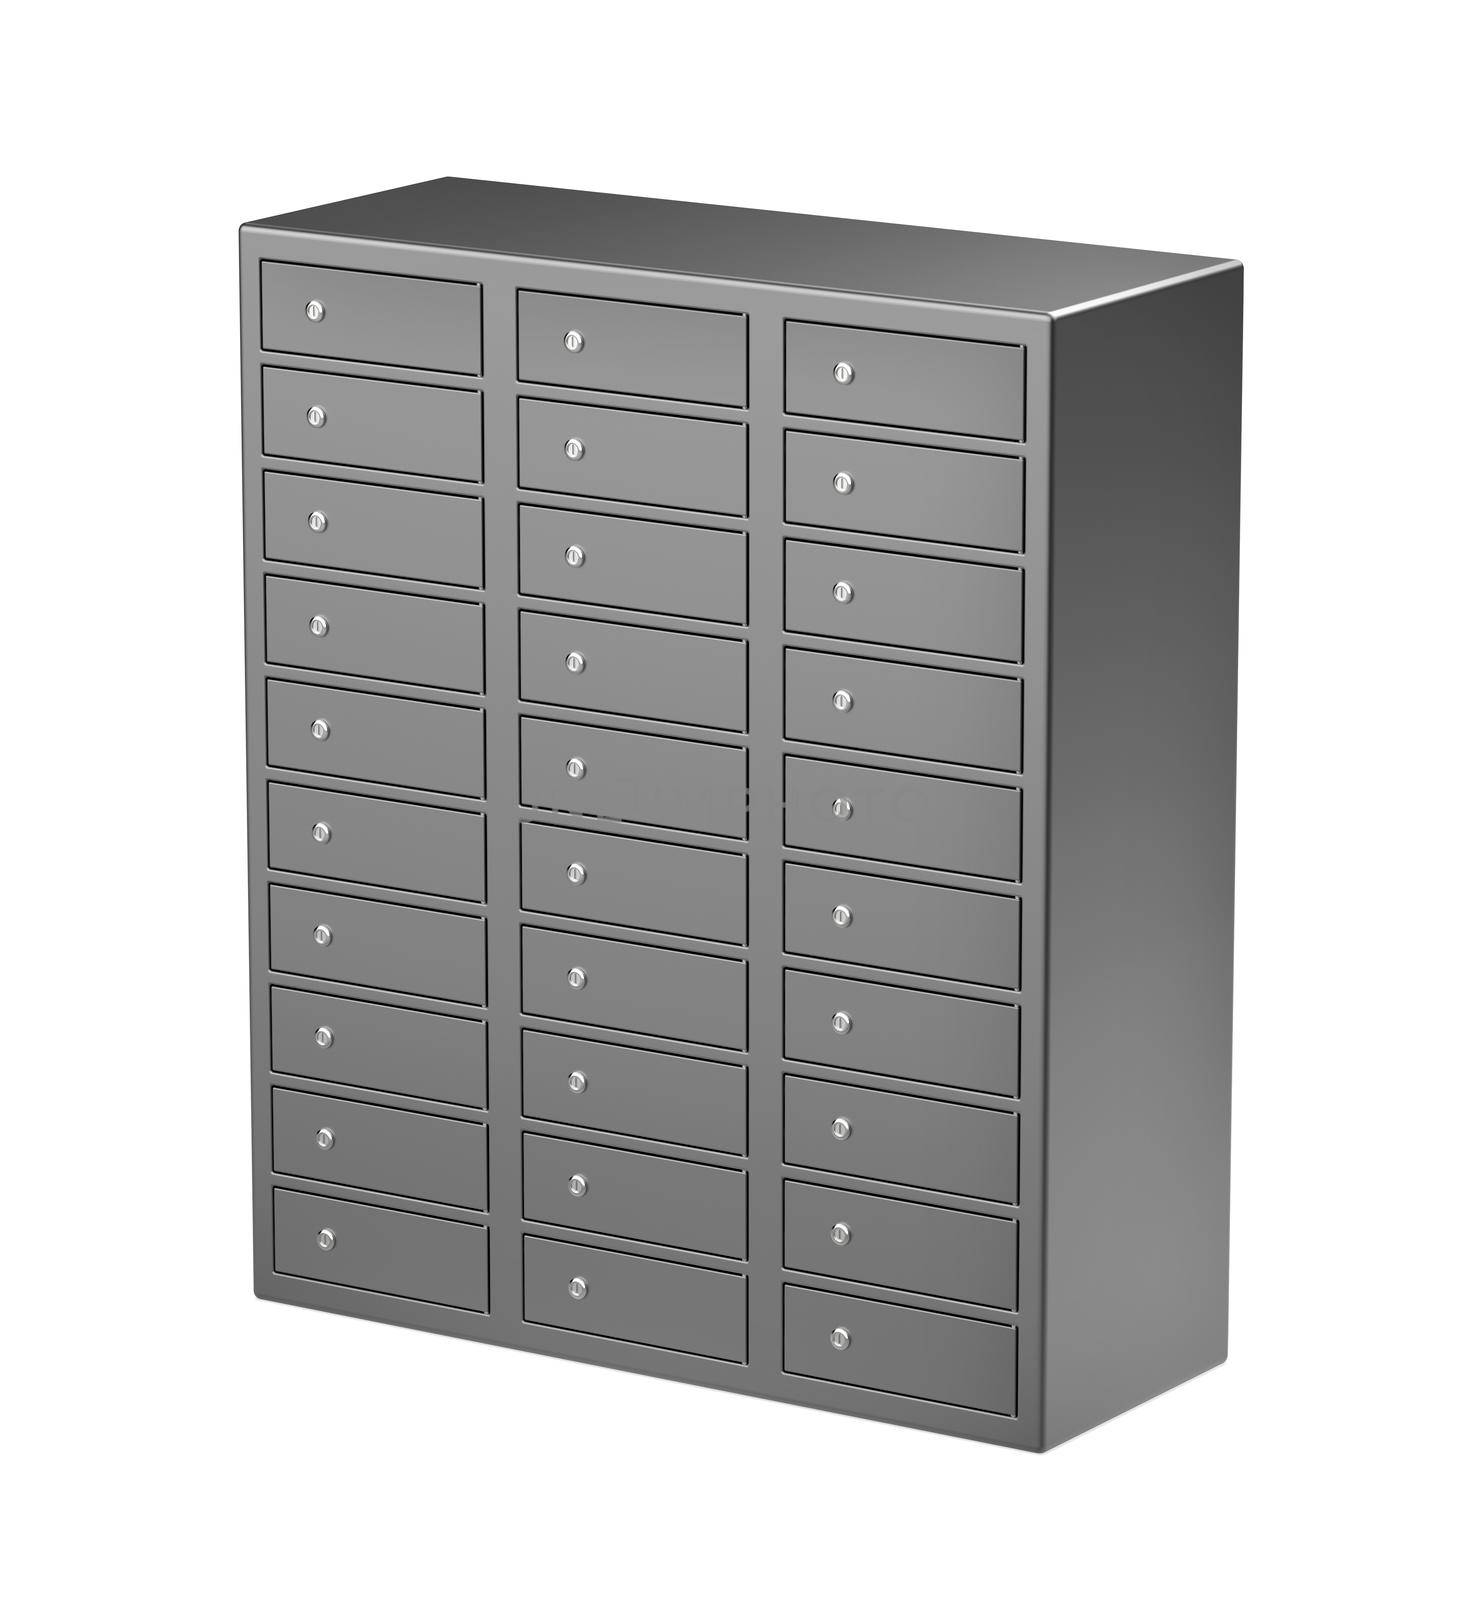 Bank safety deposit boxes by magraphics